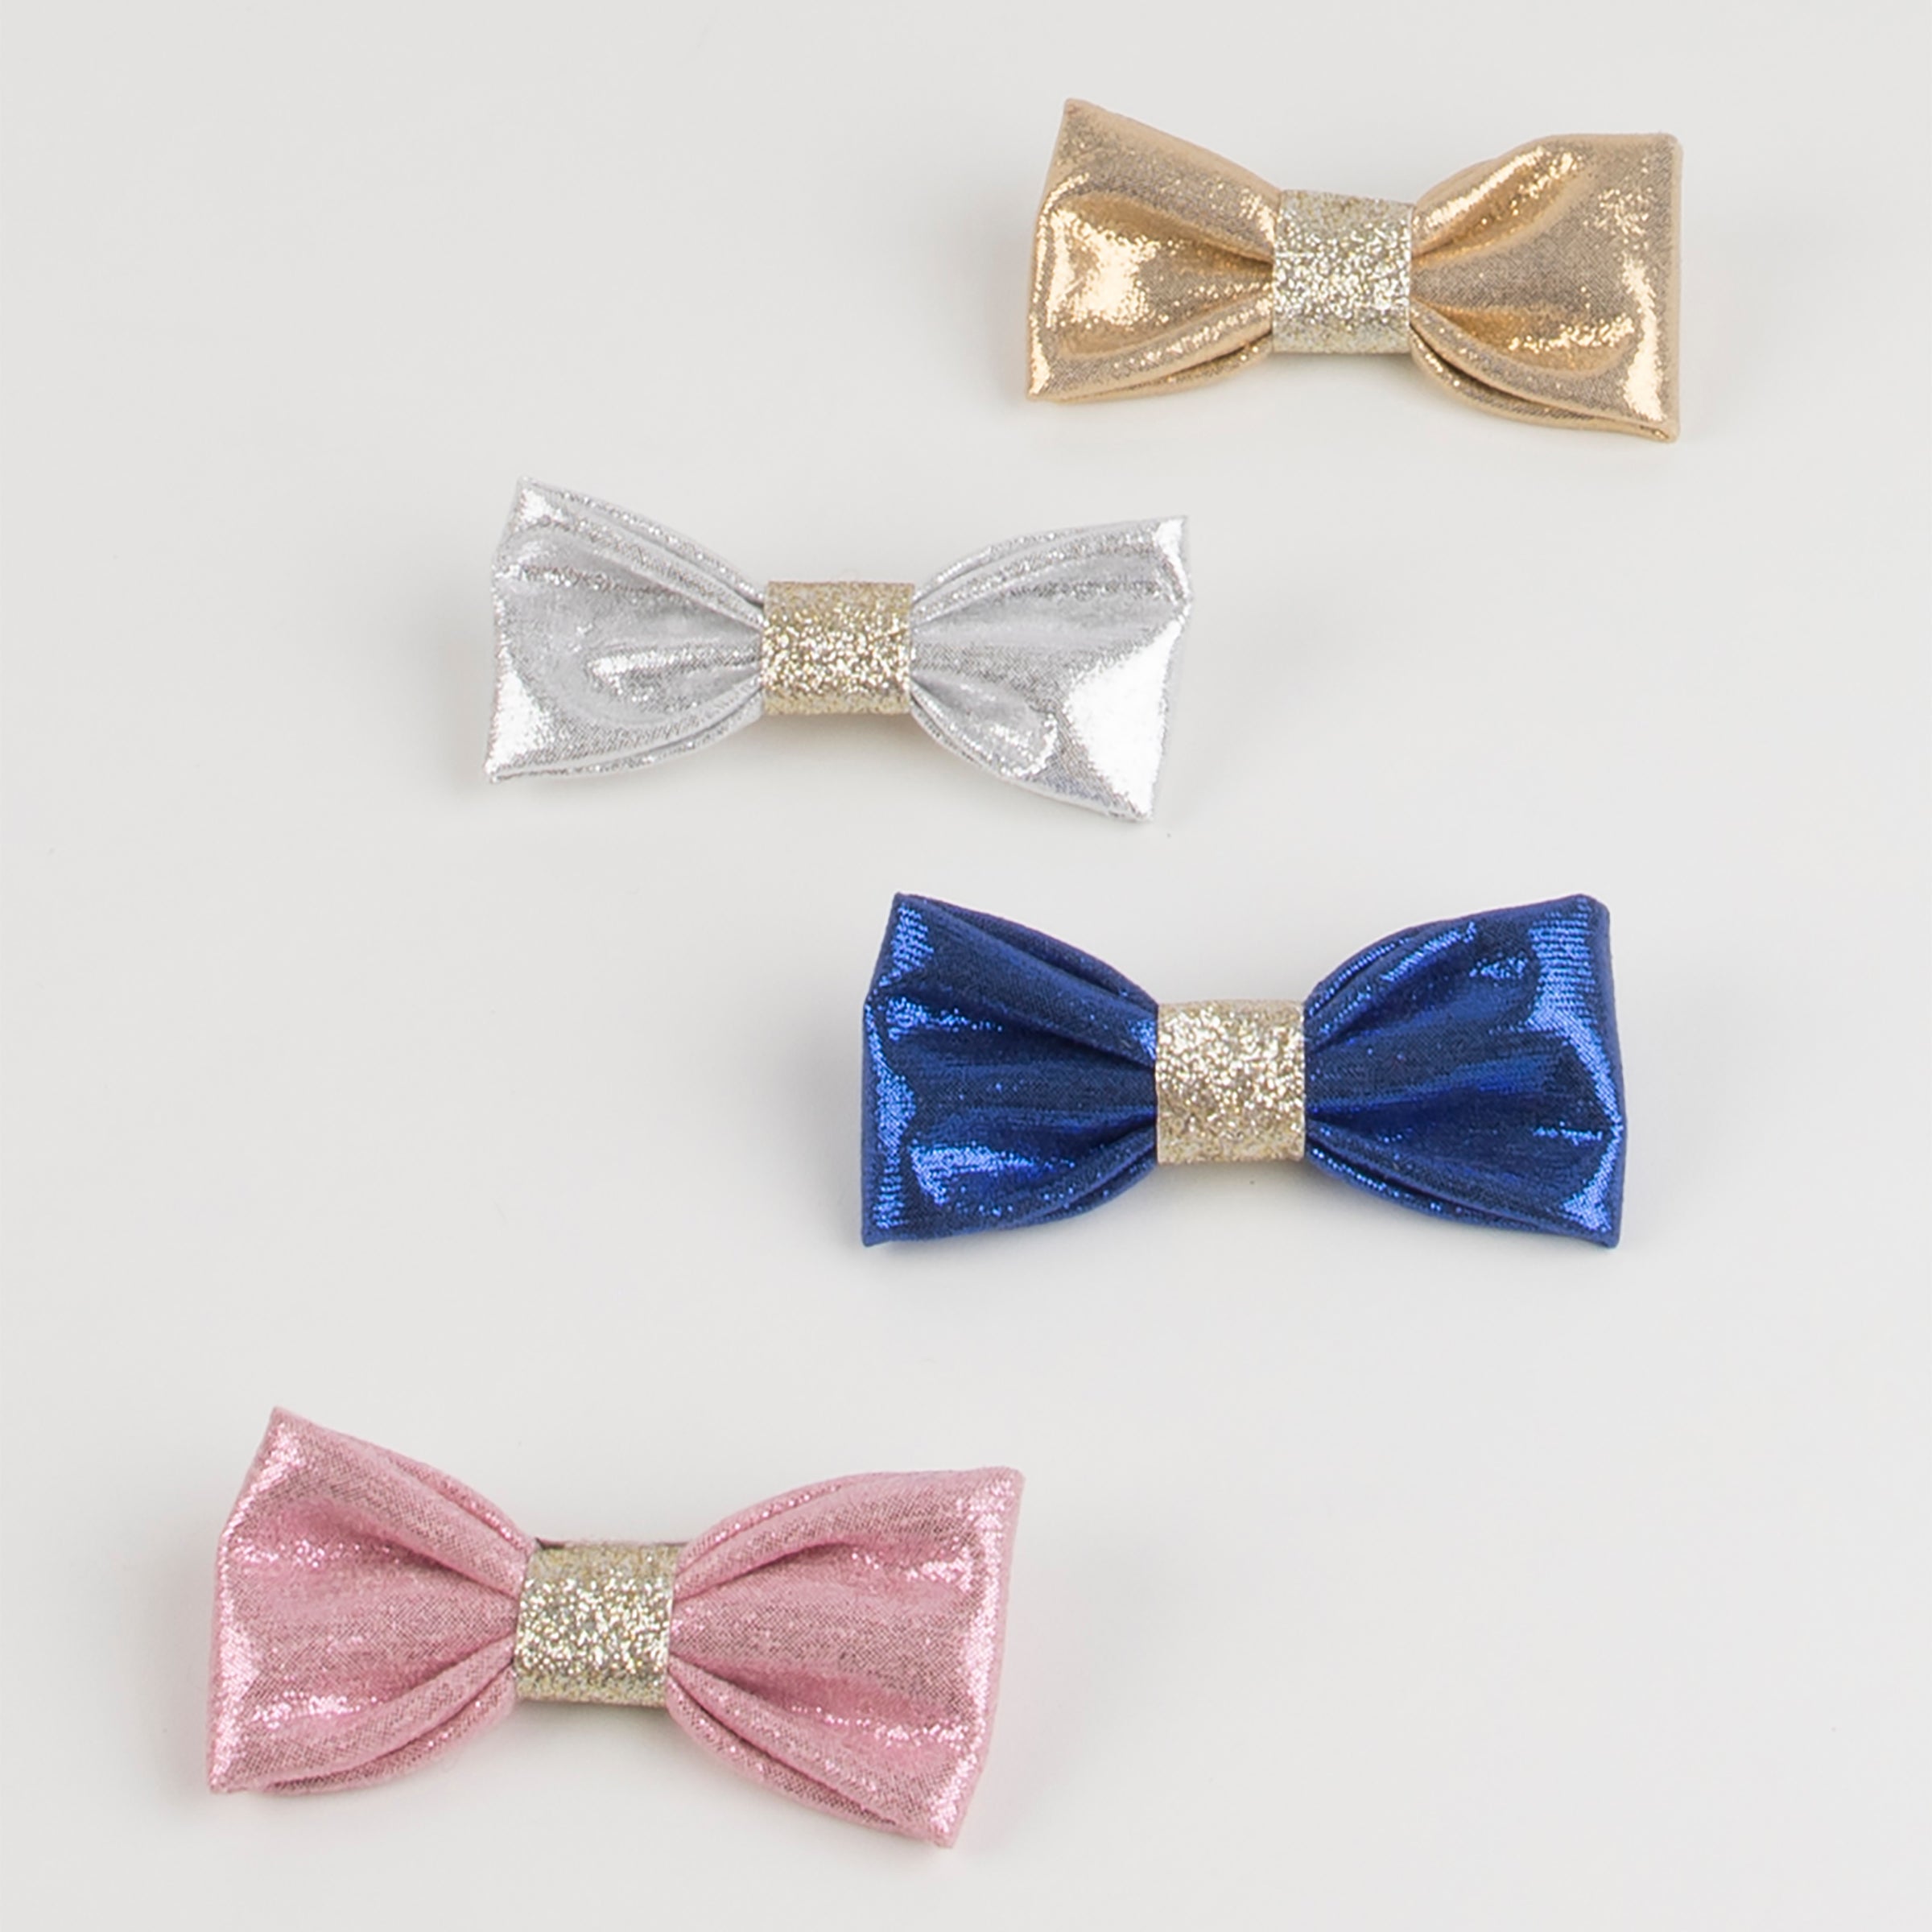 These fabulous hair accessories for girls are crafted from lurex fabric.